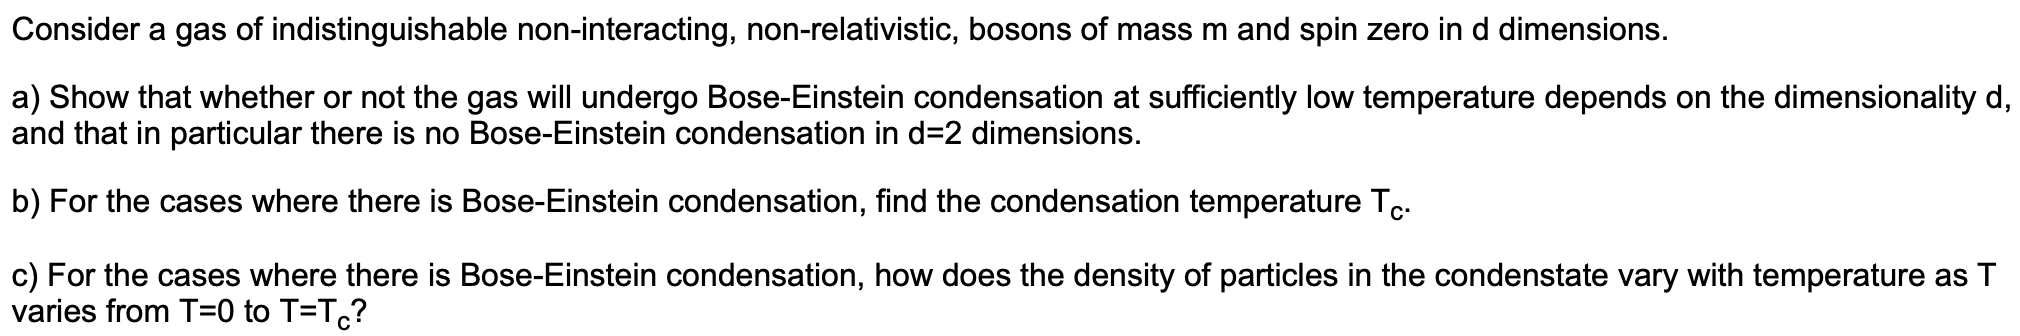 Consider a gas of indistinguishable non-interacting, non-relativistic, bosons of mass m and spin zero ind dimensions.
a) Show that whether or not the gas will undergo Bose-Einstein condensation at sufficiently low temperature depends on the dimensionality d,
and that in particular there is no Bose-Einstein condensation in d=2 dimensions.
b) For the cases where there is Bose-Einstein condensation, find the condensation temperature T..
c) For the cases where there is Bose-Einstein condensation, how does the density of particles in the condenstate vary with temperature as T
varies from T=0 to T=T?
